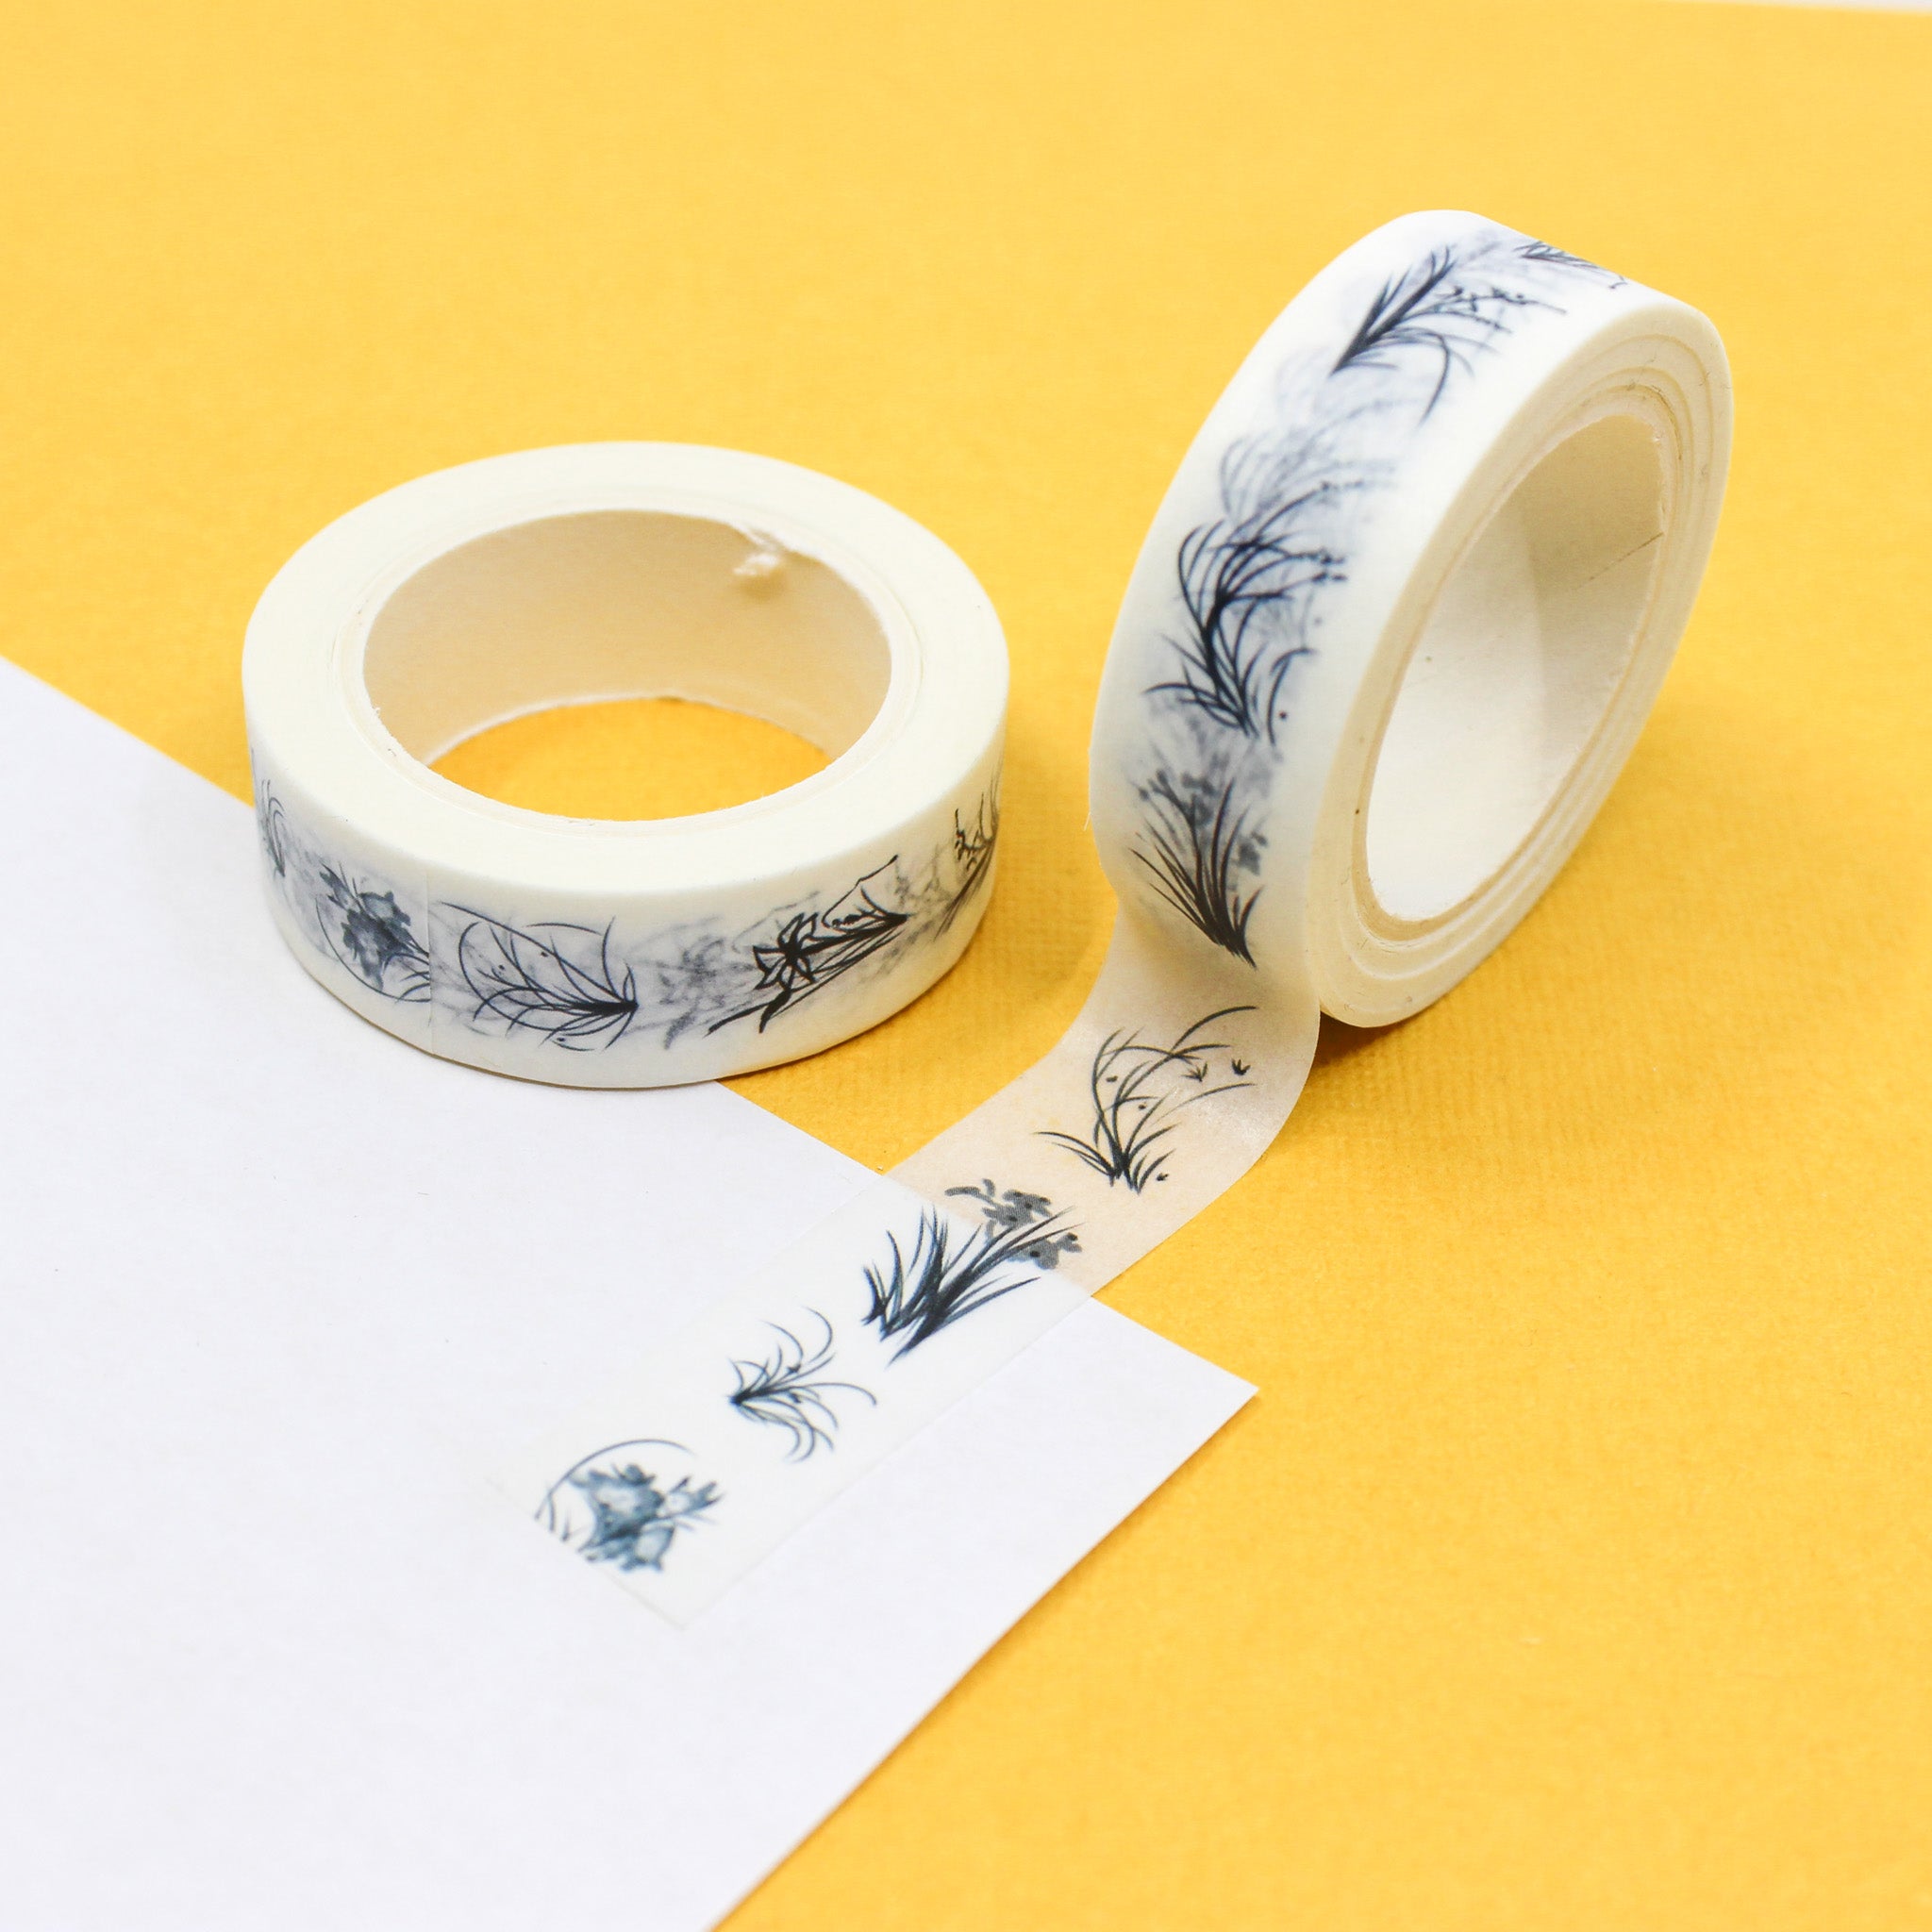 This is a willow botanicals branch pattern washi tape from BBB Supplies Craft Shop